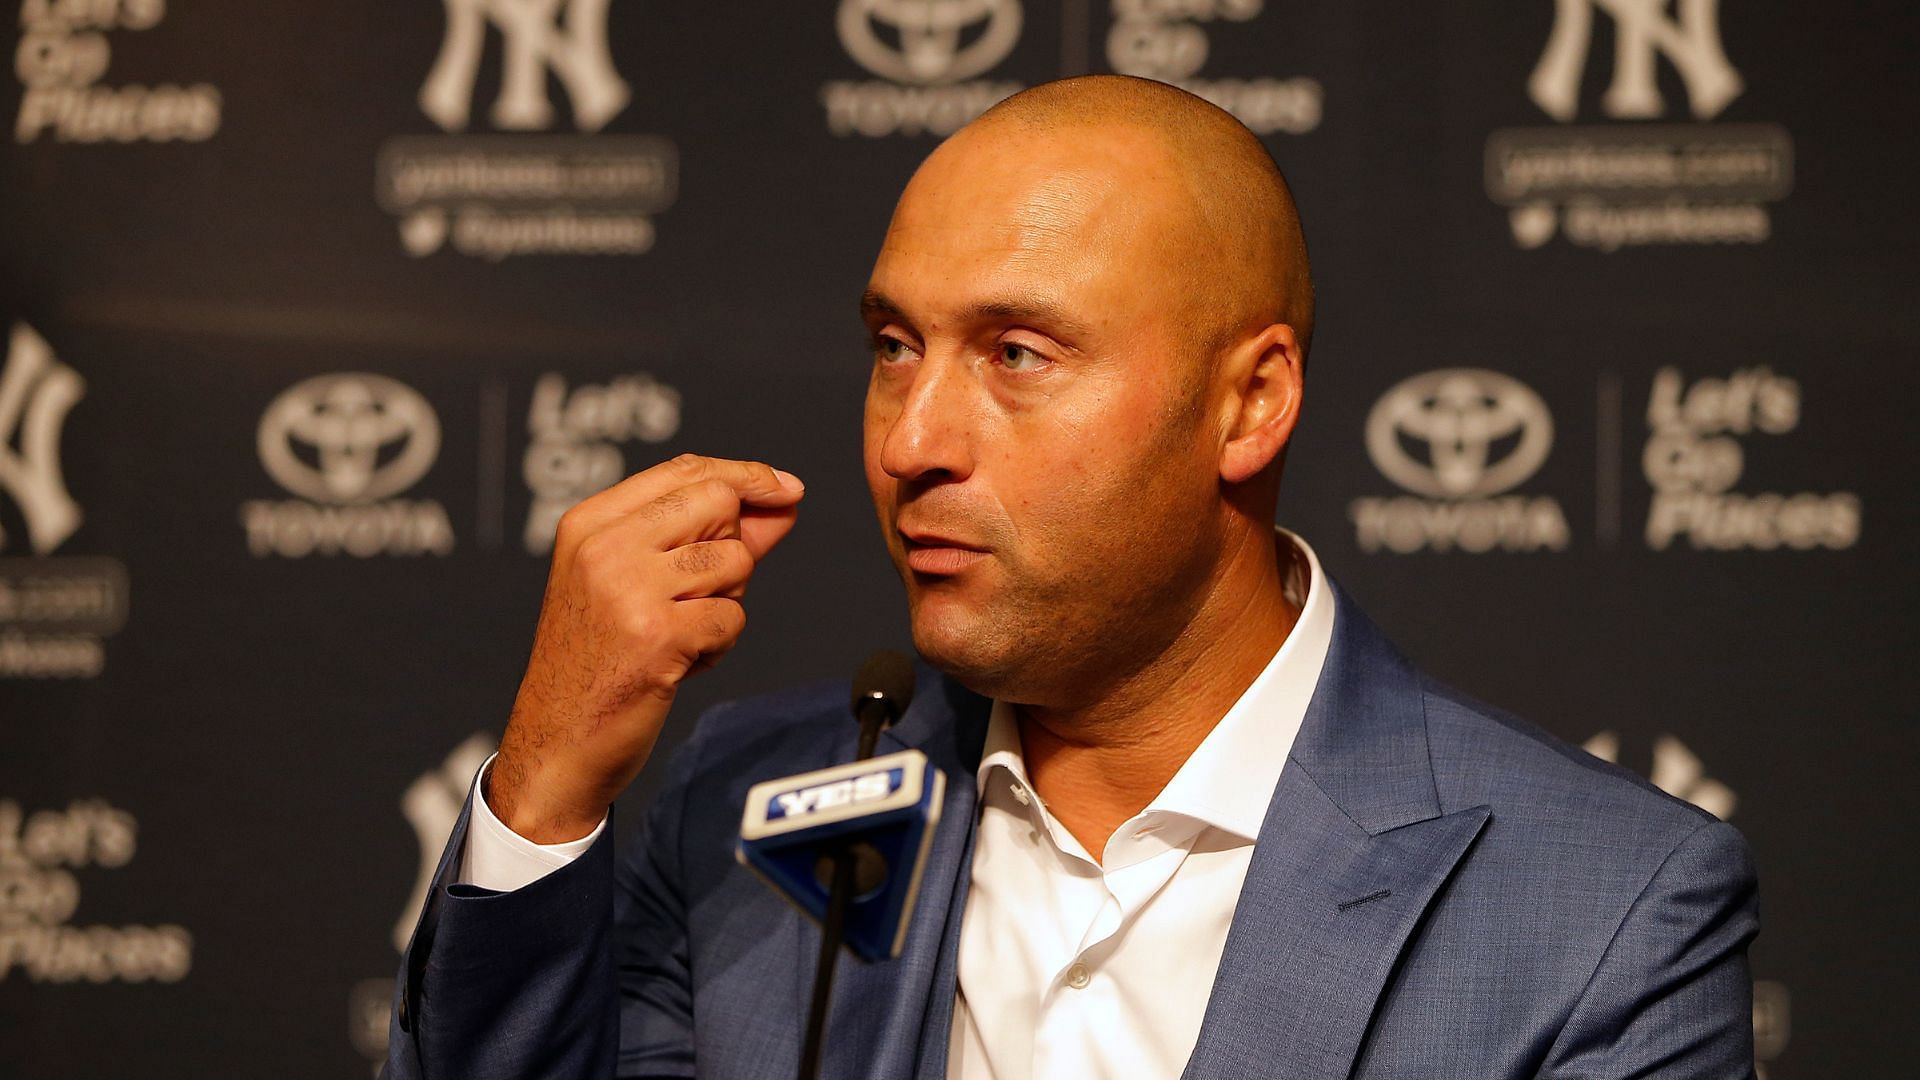 Derek Jeter opened up on his mindset as an athlete in the MLB during an interview in 2021